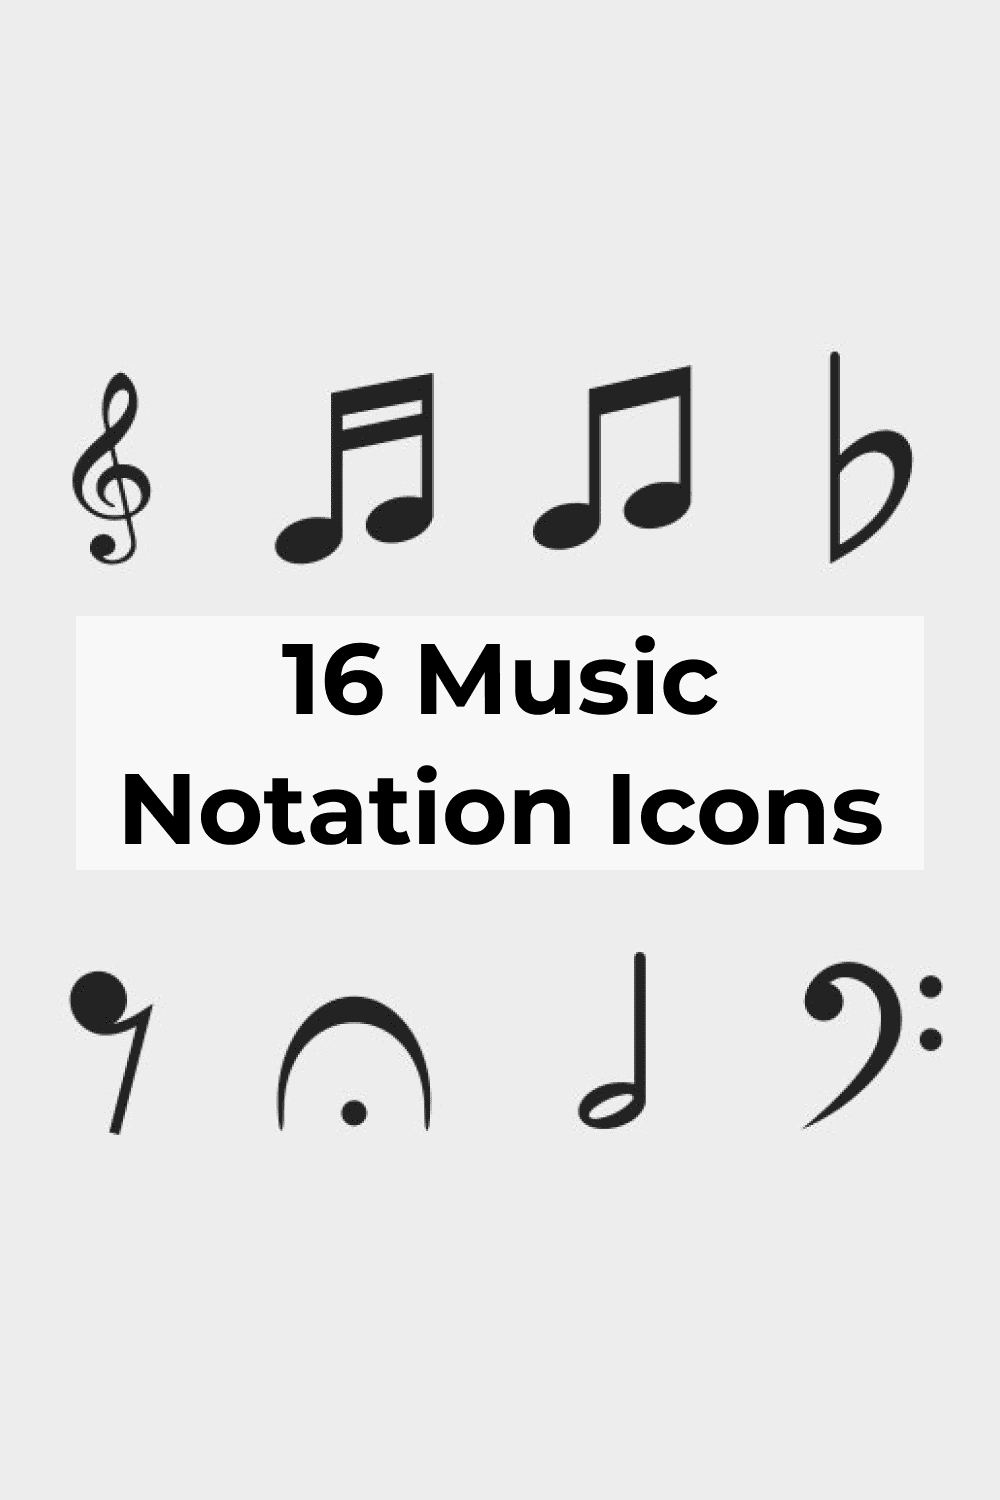 Use these creative icons for decorating your topic.